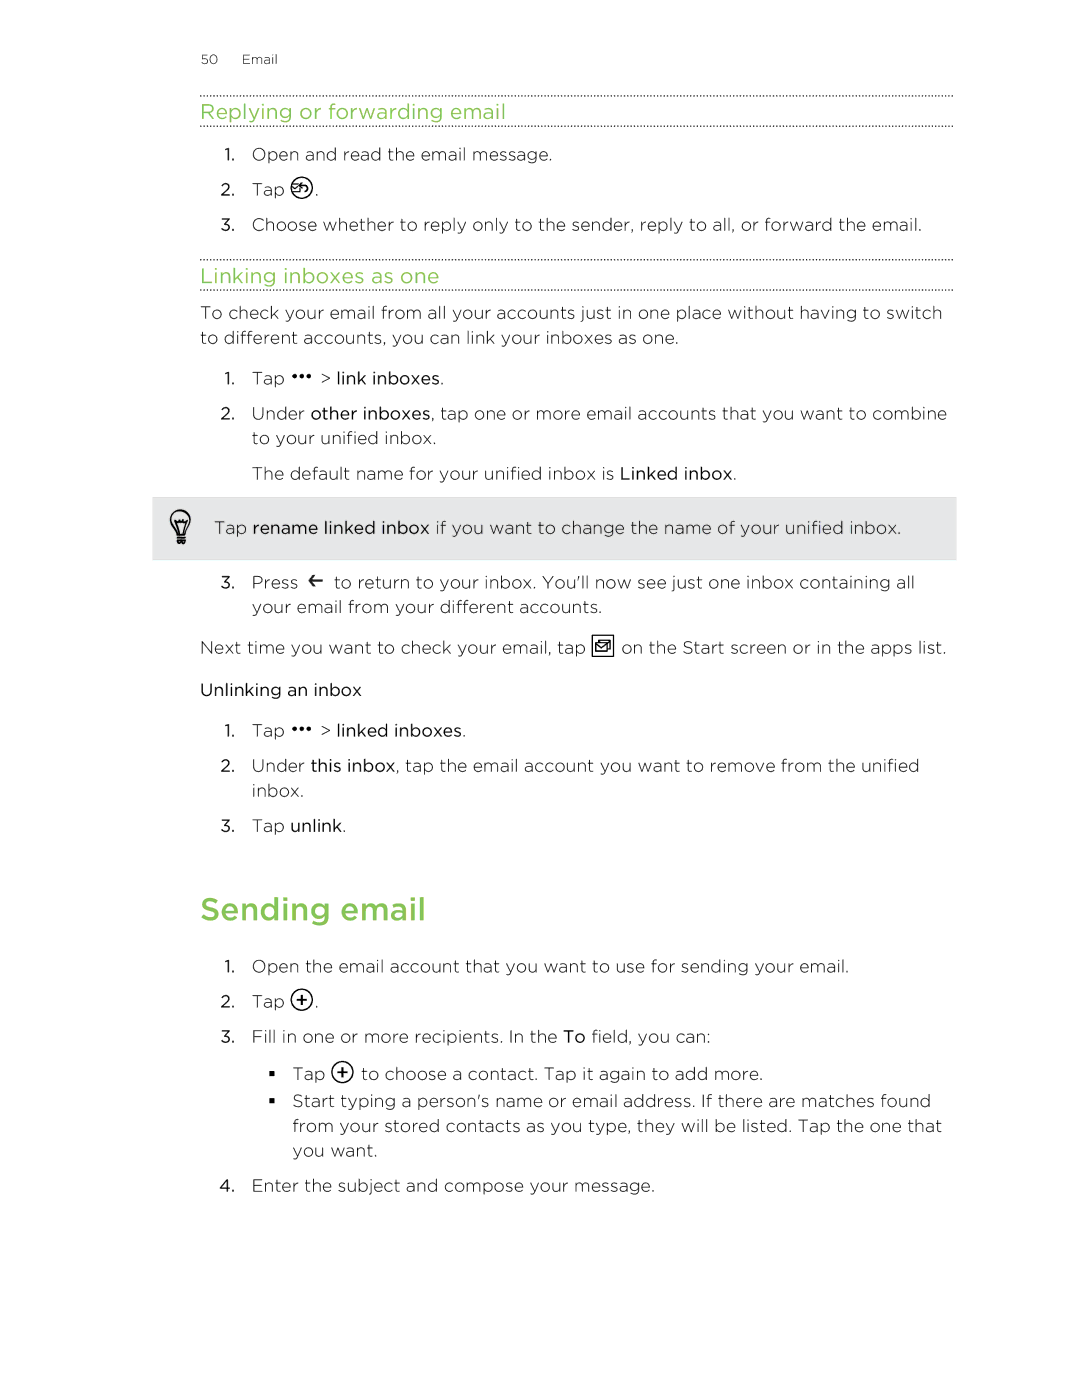 HTC 8X manual Sending email, Replying or forwarding email, Linking inboxes as one 